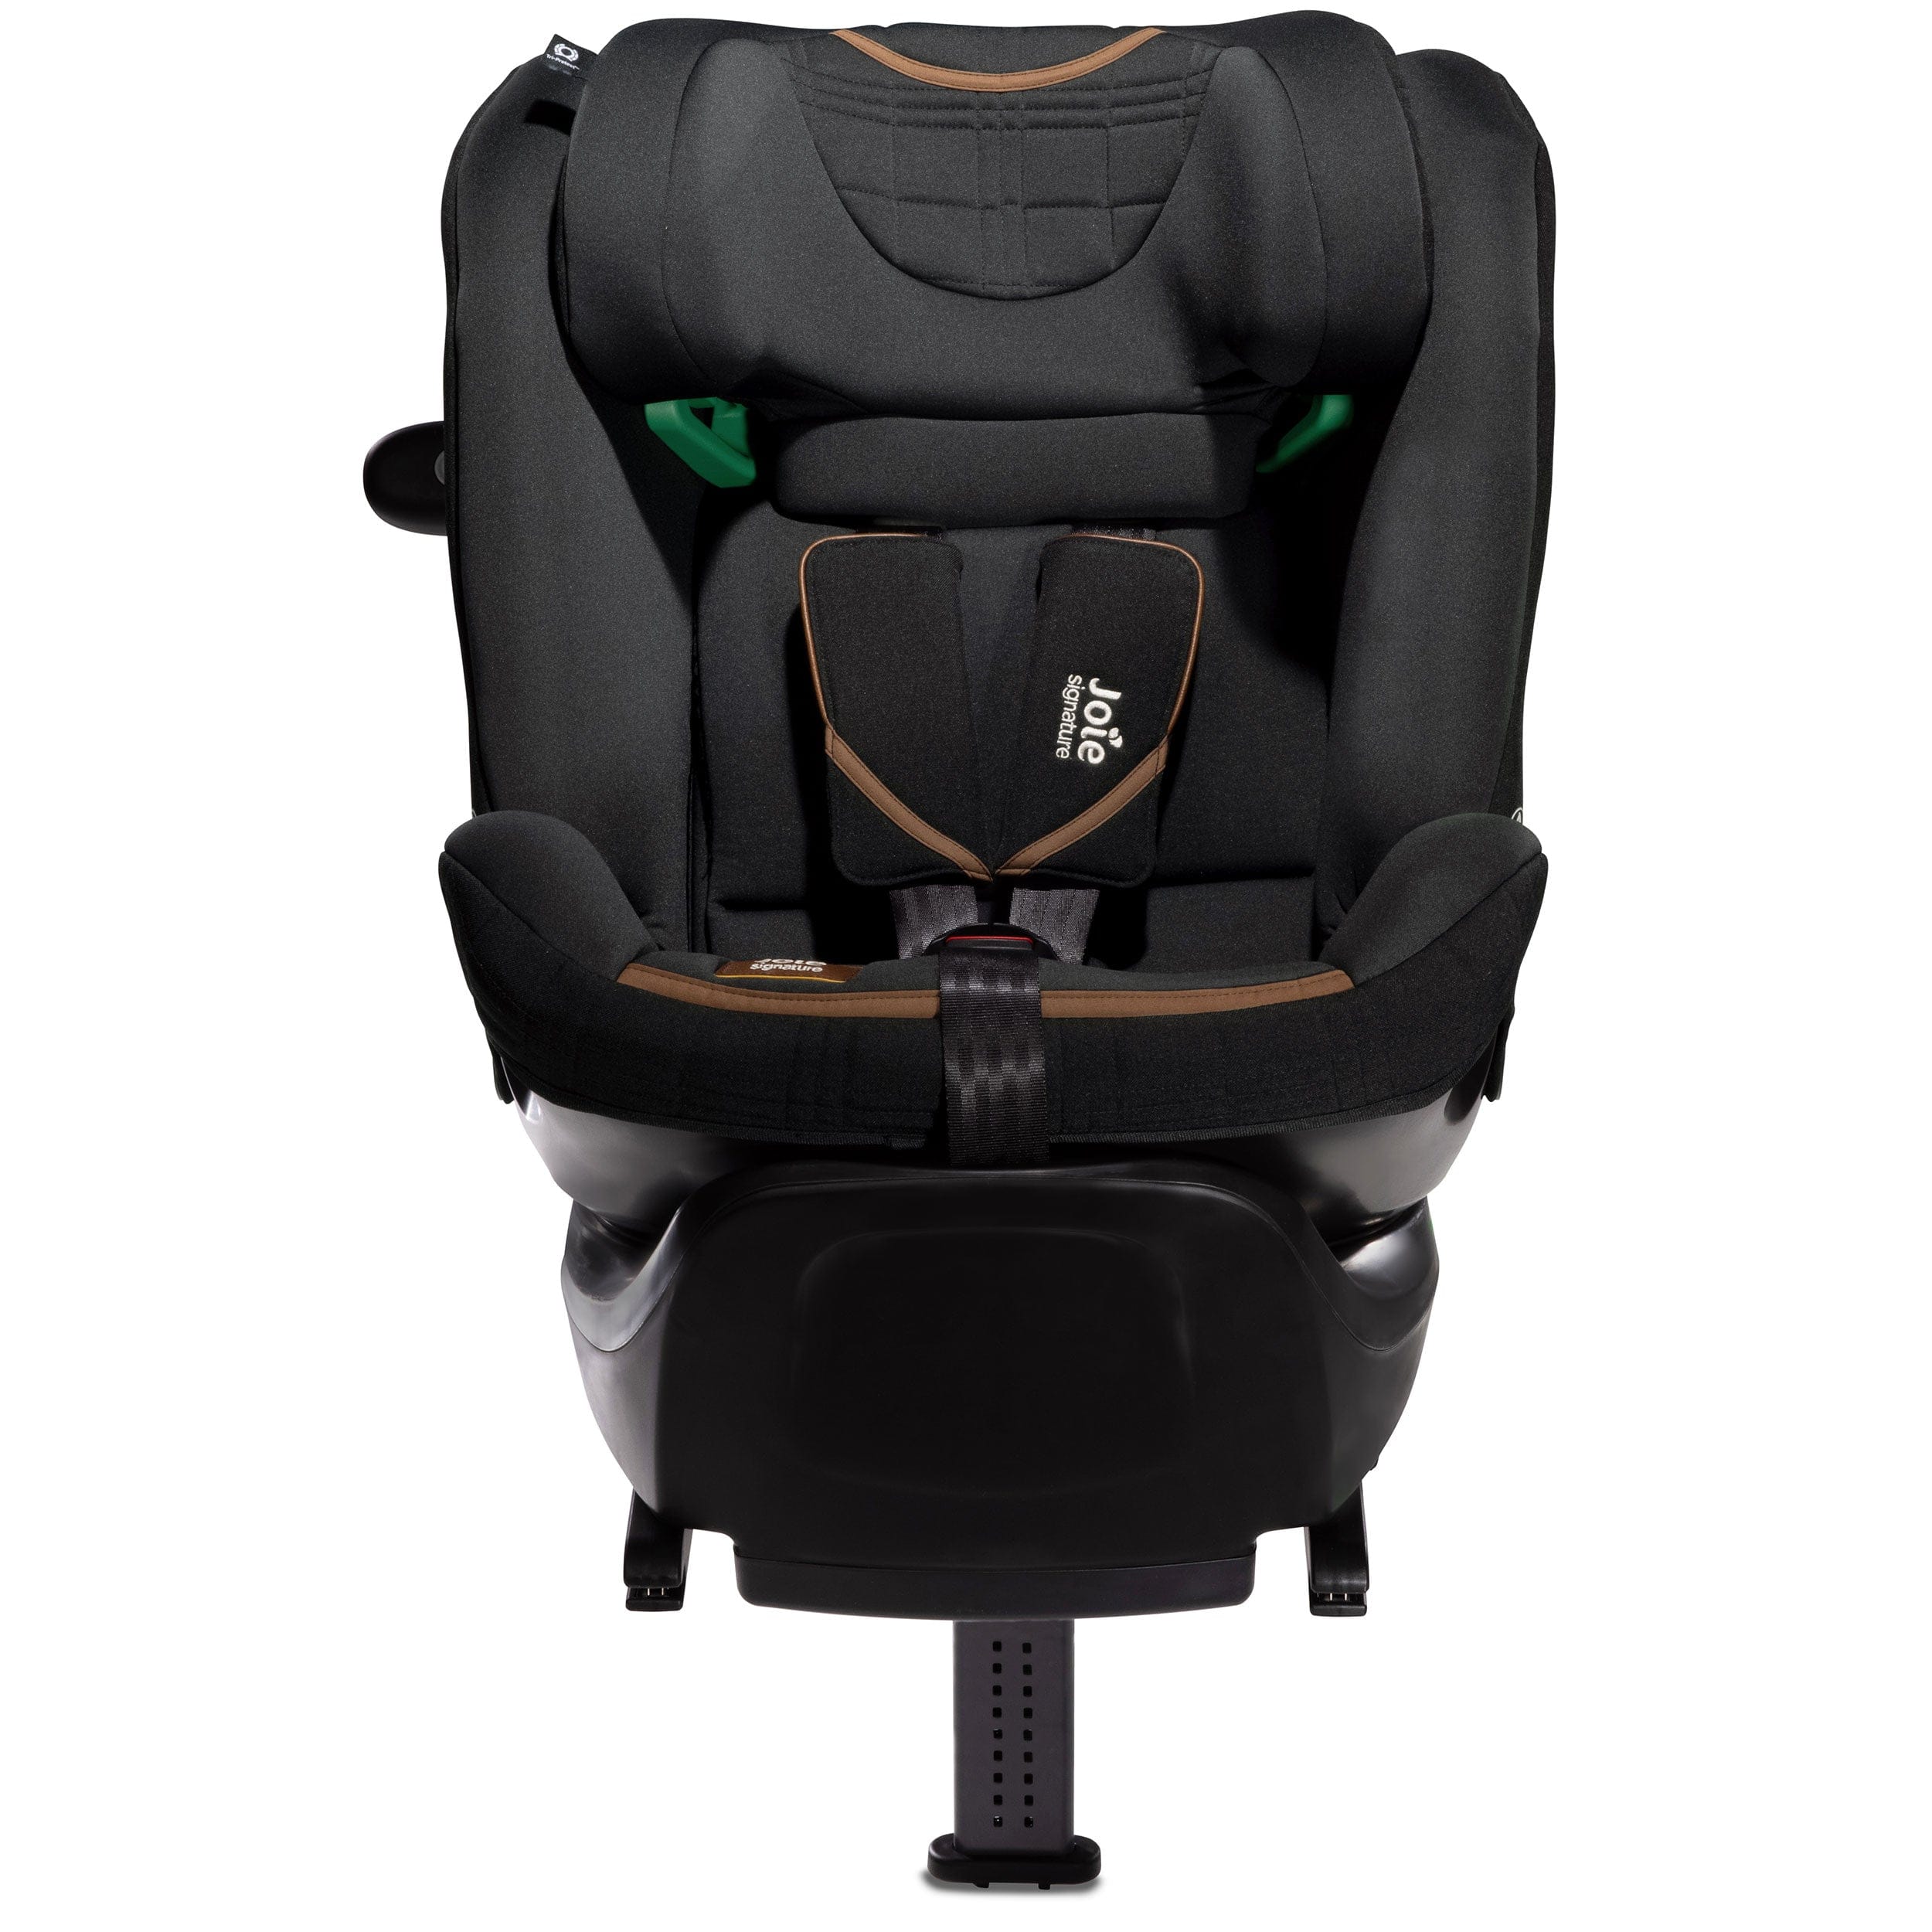 Joie combination car seats Joie i-Spin XL - Eclipse C2205AAECL000